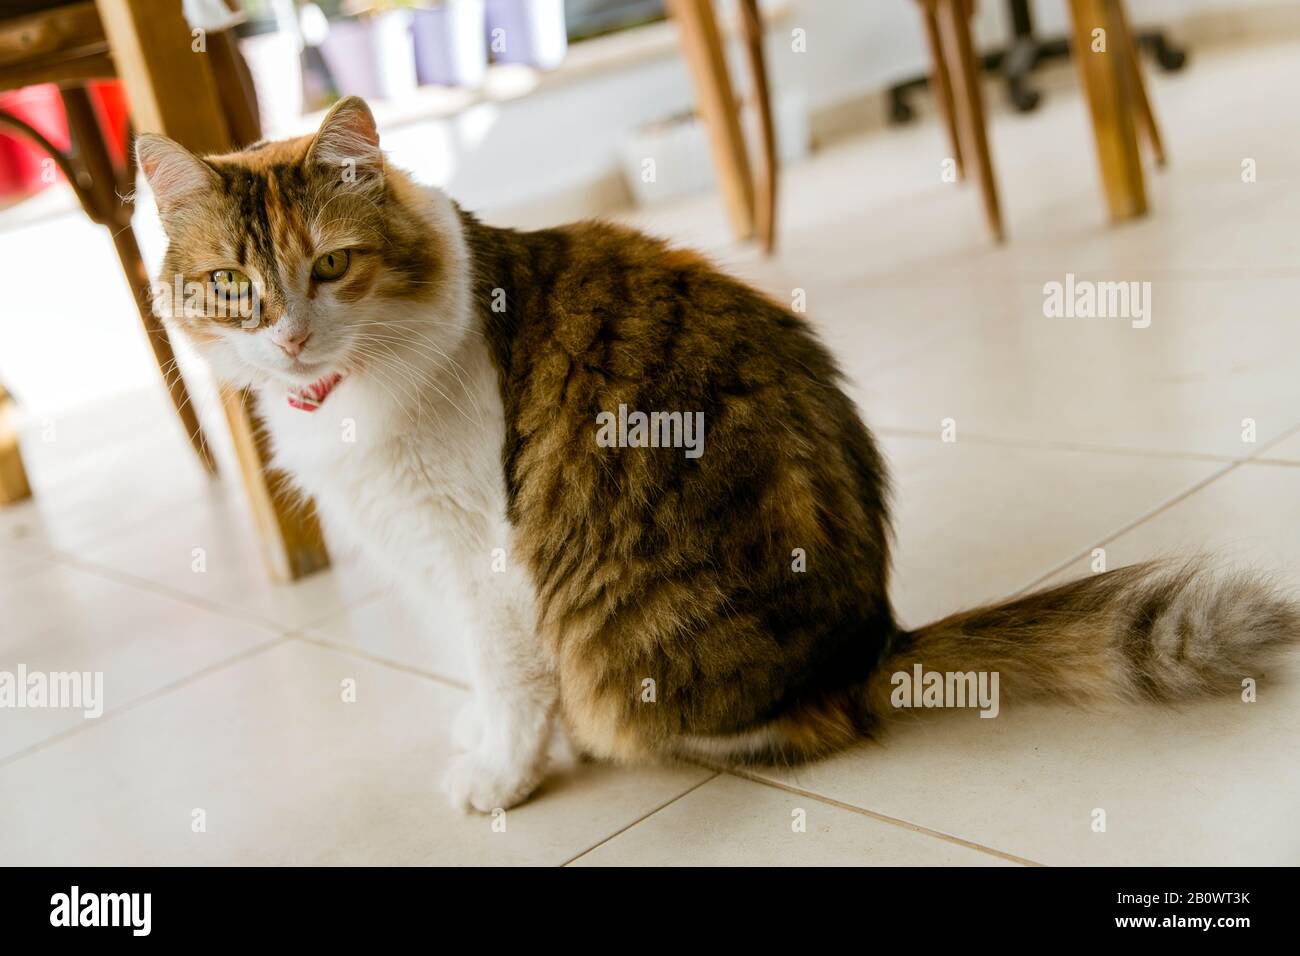 Long fur calico cat in tilted image, sitting on the ground and looking at lens. Stock Photo